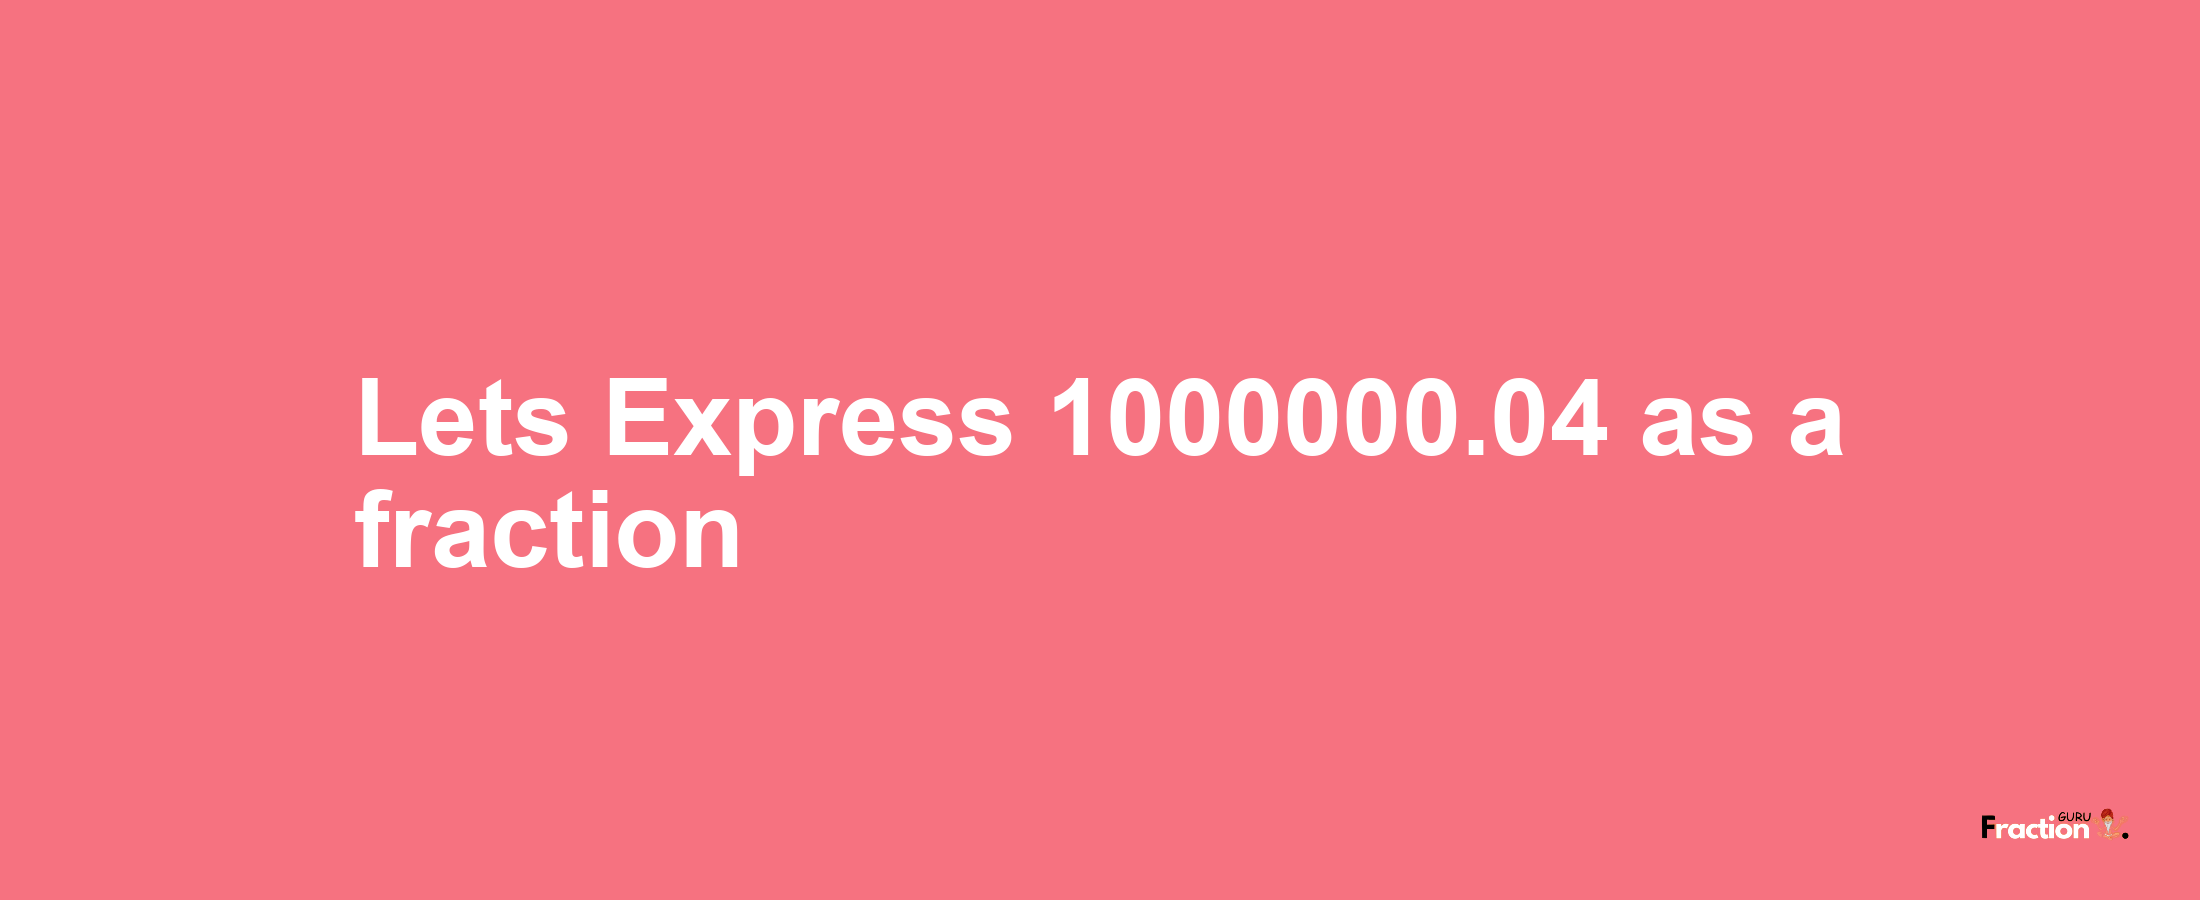 Lets Express 1000000.04 as afraction